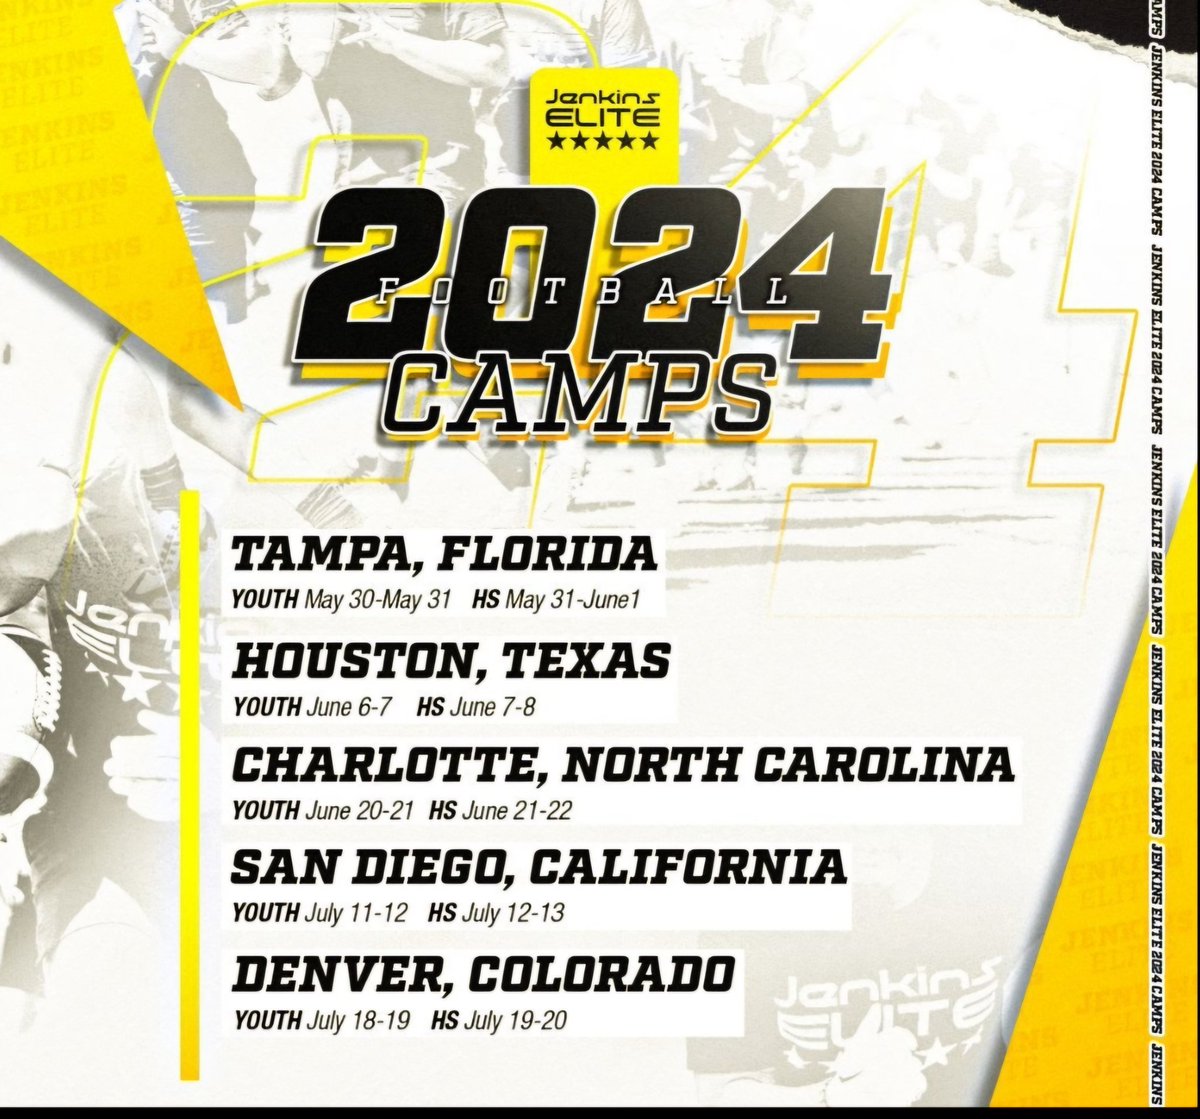 Thank you for the invite for the Jenkins Elite Camp @TJenkinsElite  @BECoachKendrick @KPGfootball @LippertScouting @CSmithScout @drew_toennies @RoadToHouston @cleats2whistle @Bryan_Ault @SeanW_Rivals @Excelspeed12 @BE_Chargers